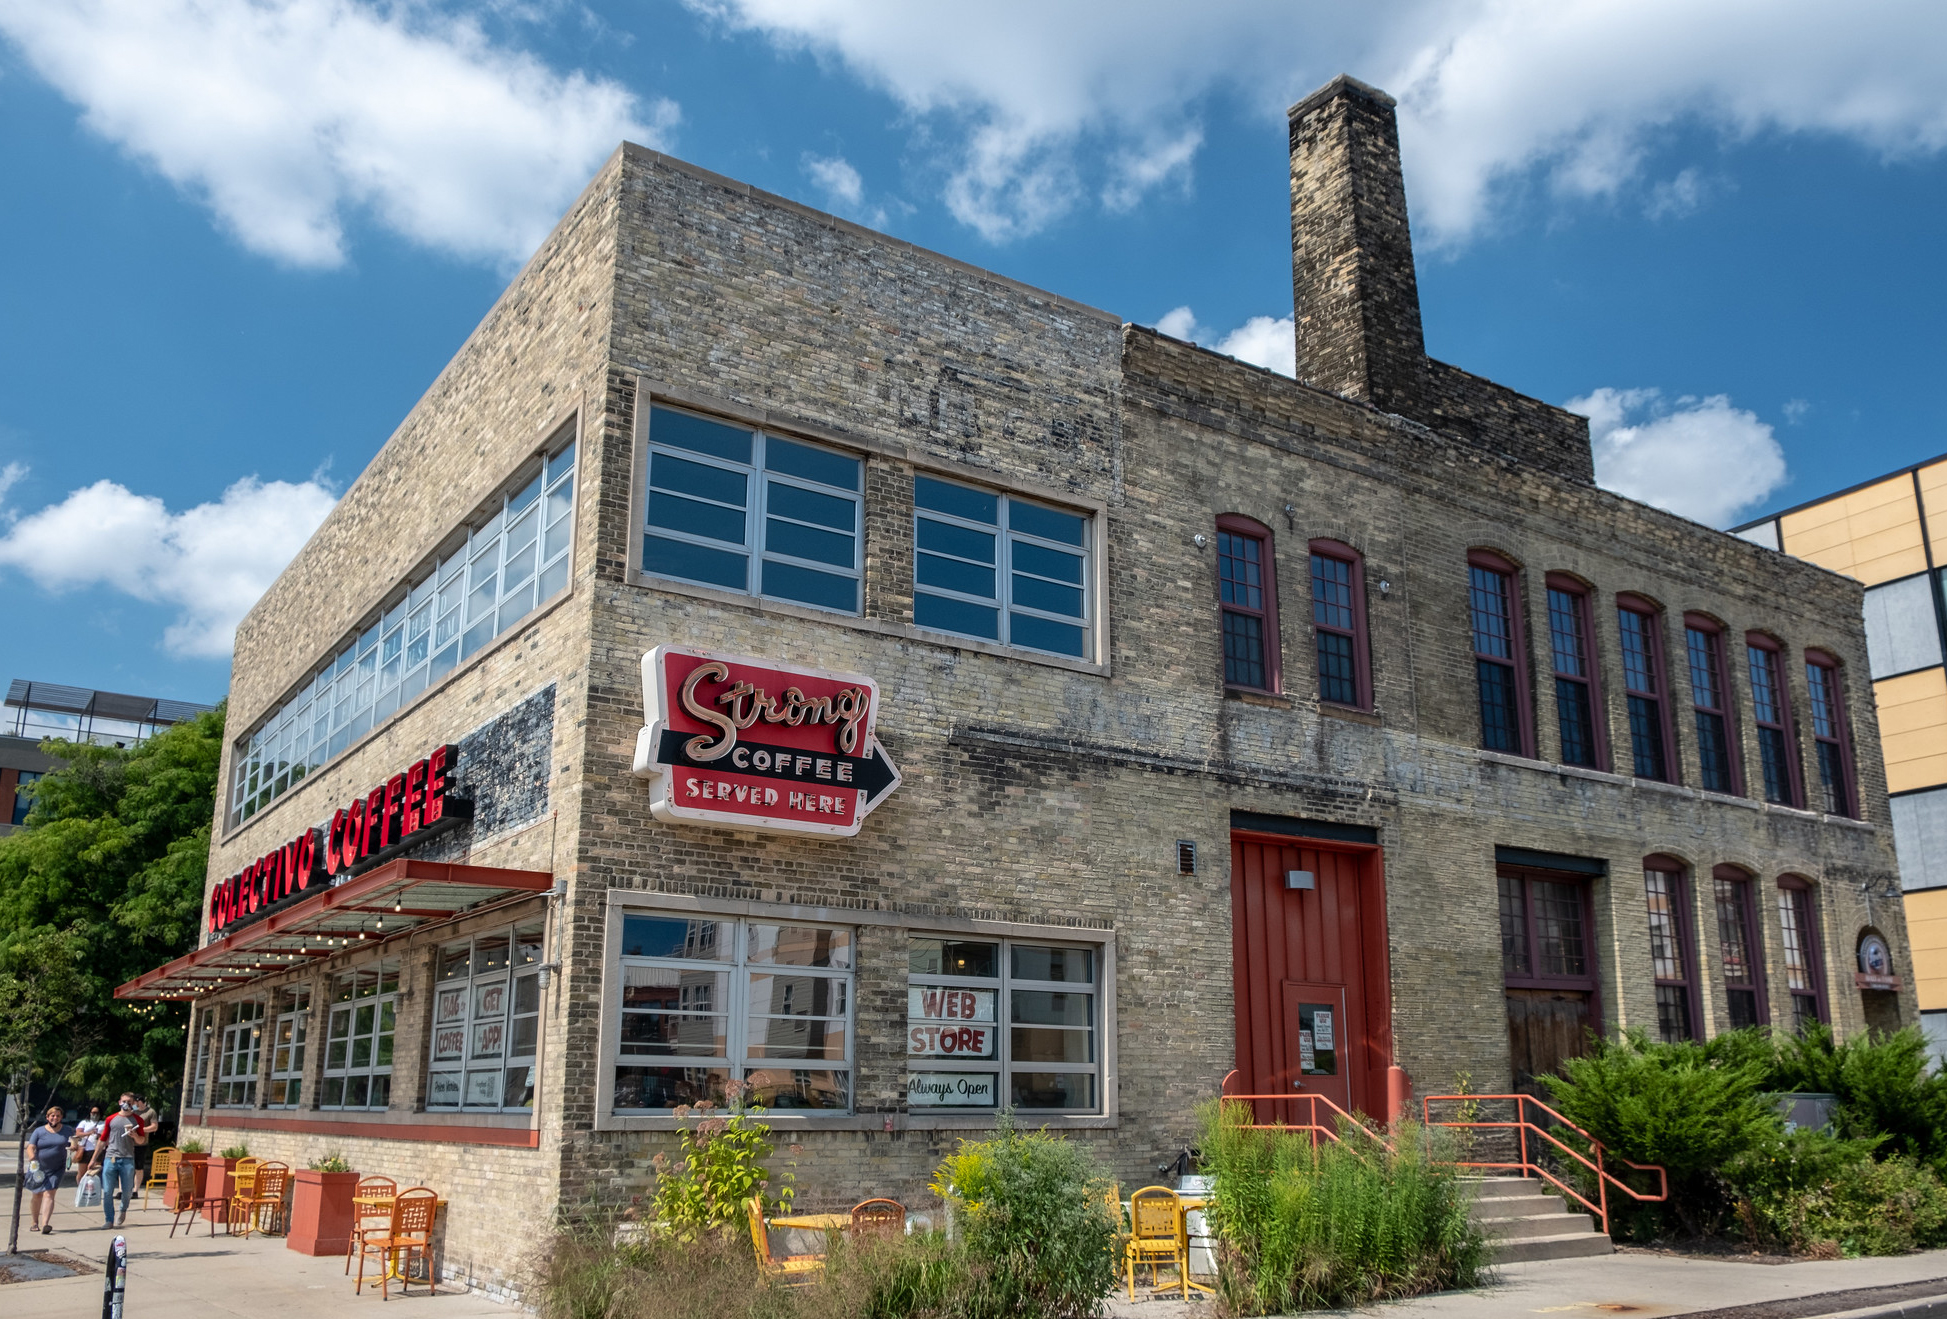 A two-story grey brick building with a red Colectivo Coffee sign